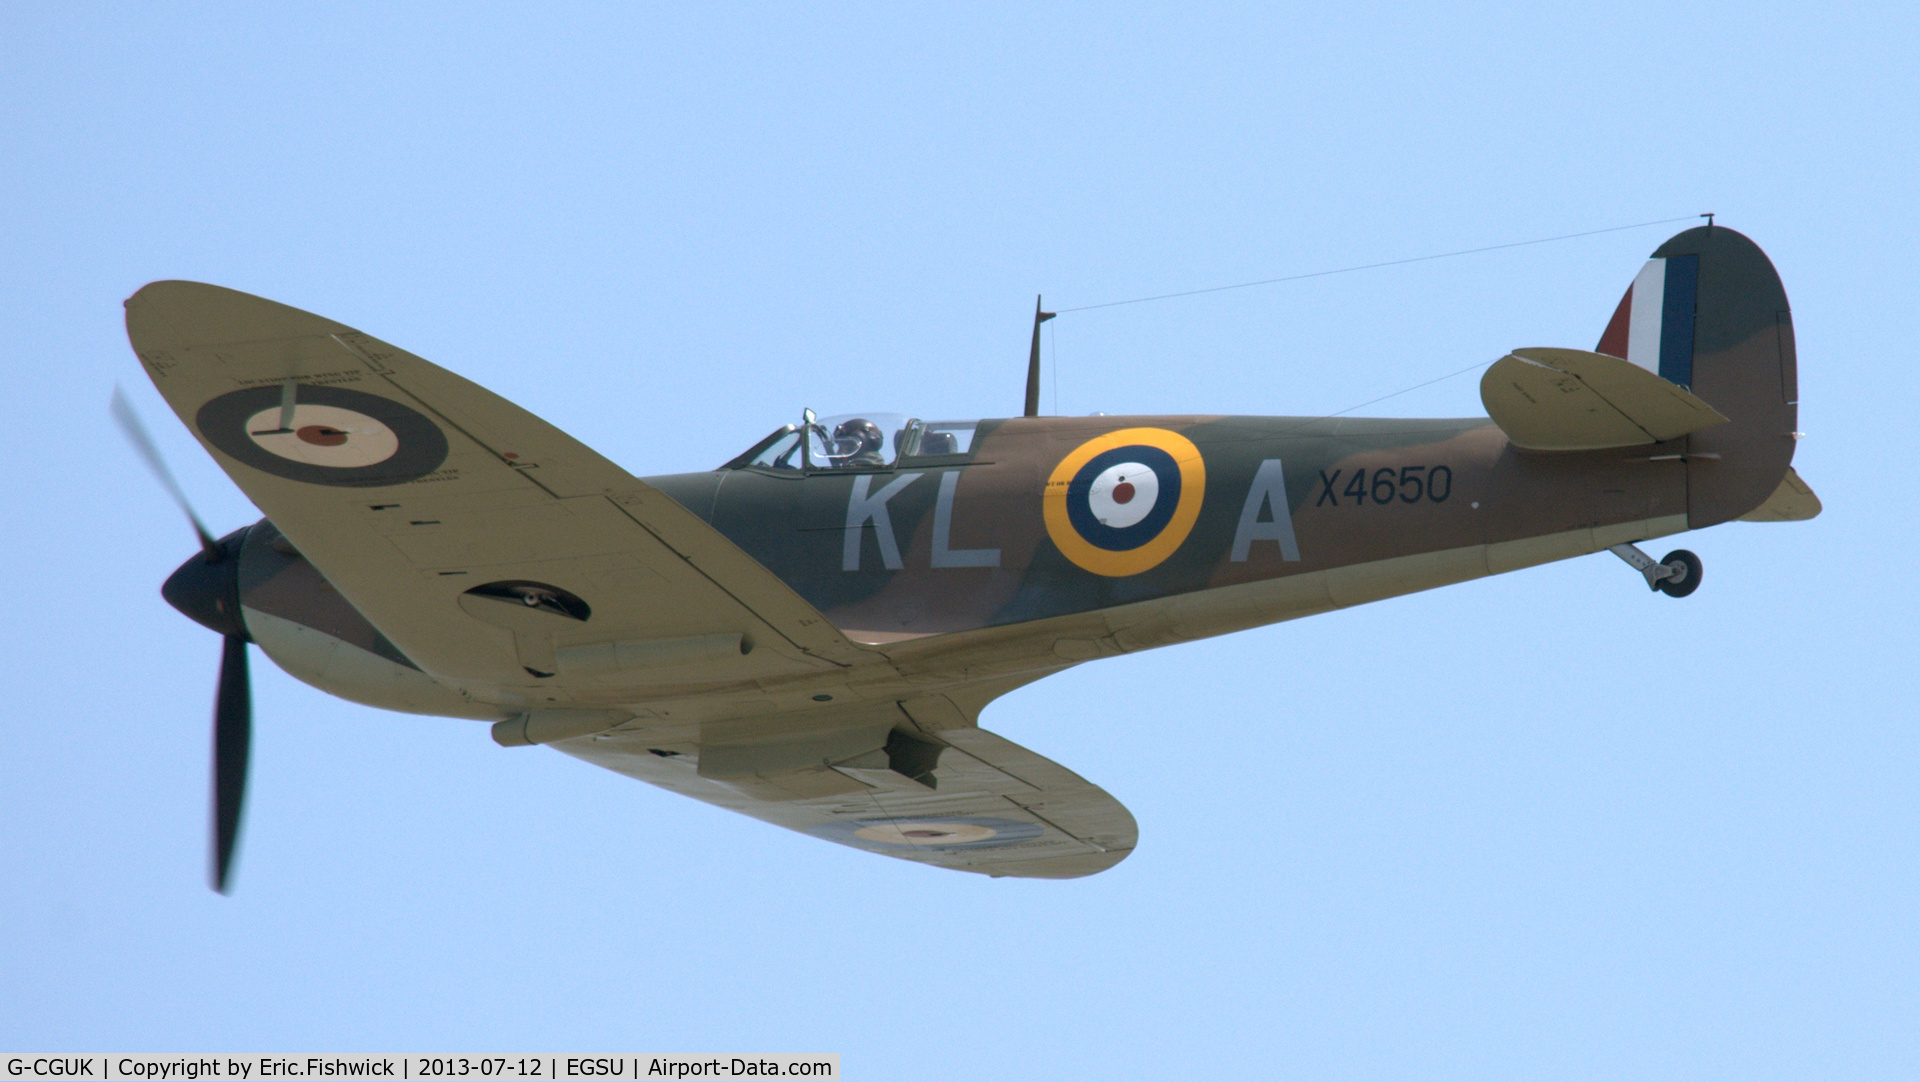 G-CGUK, 1940 Supermarine 300 Spitfire Mk1A C/N 6S-75531, 44. X4650 on the eve of Flying Legends Air Show, Duxford - July 2013.